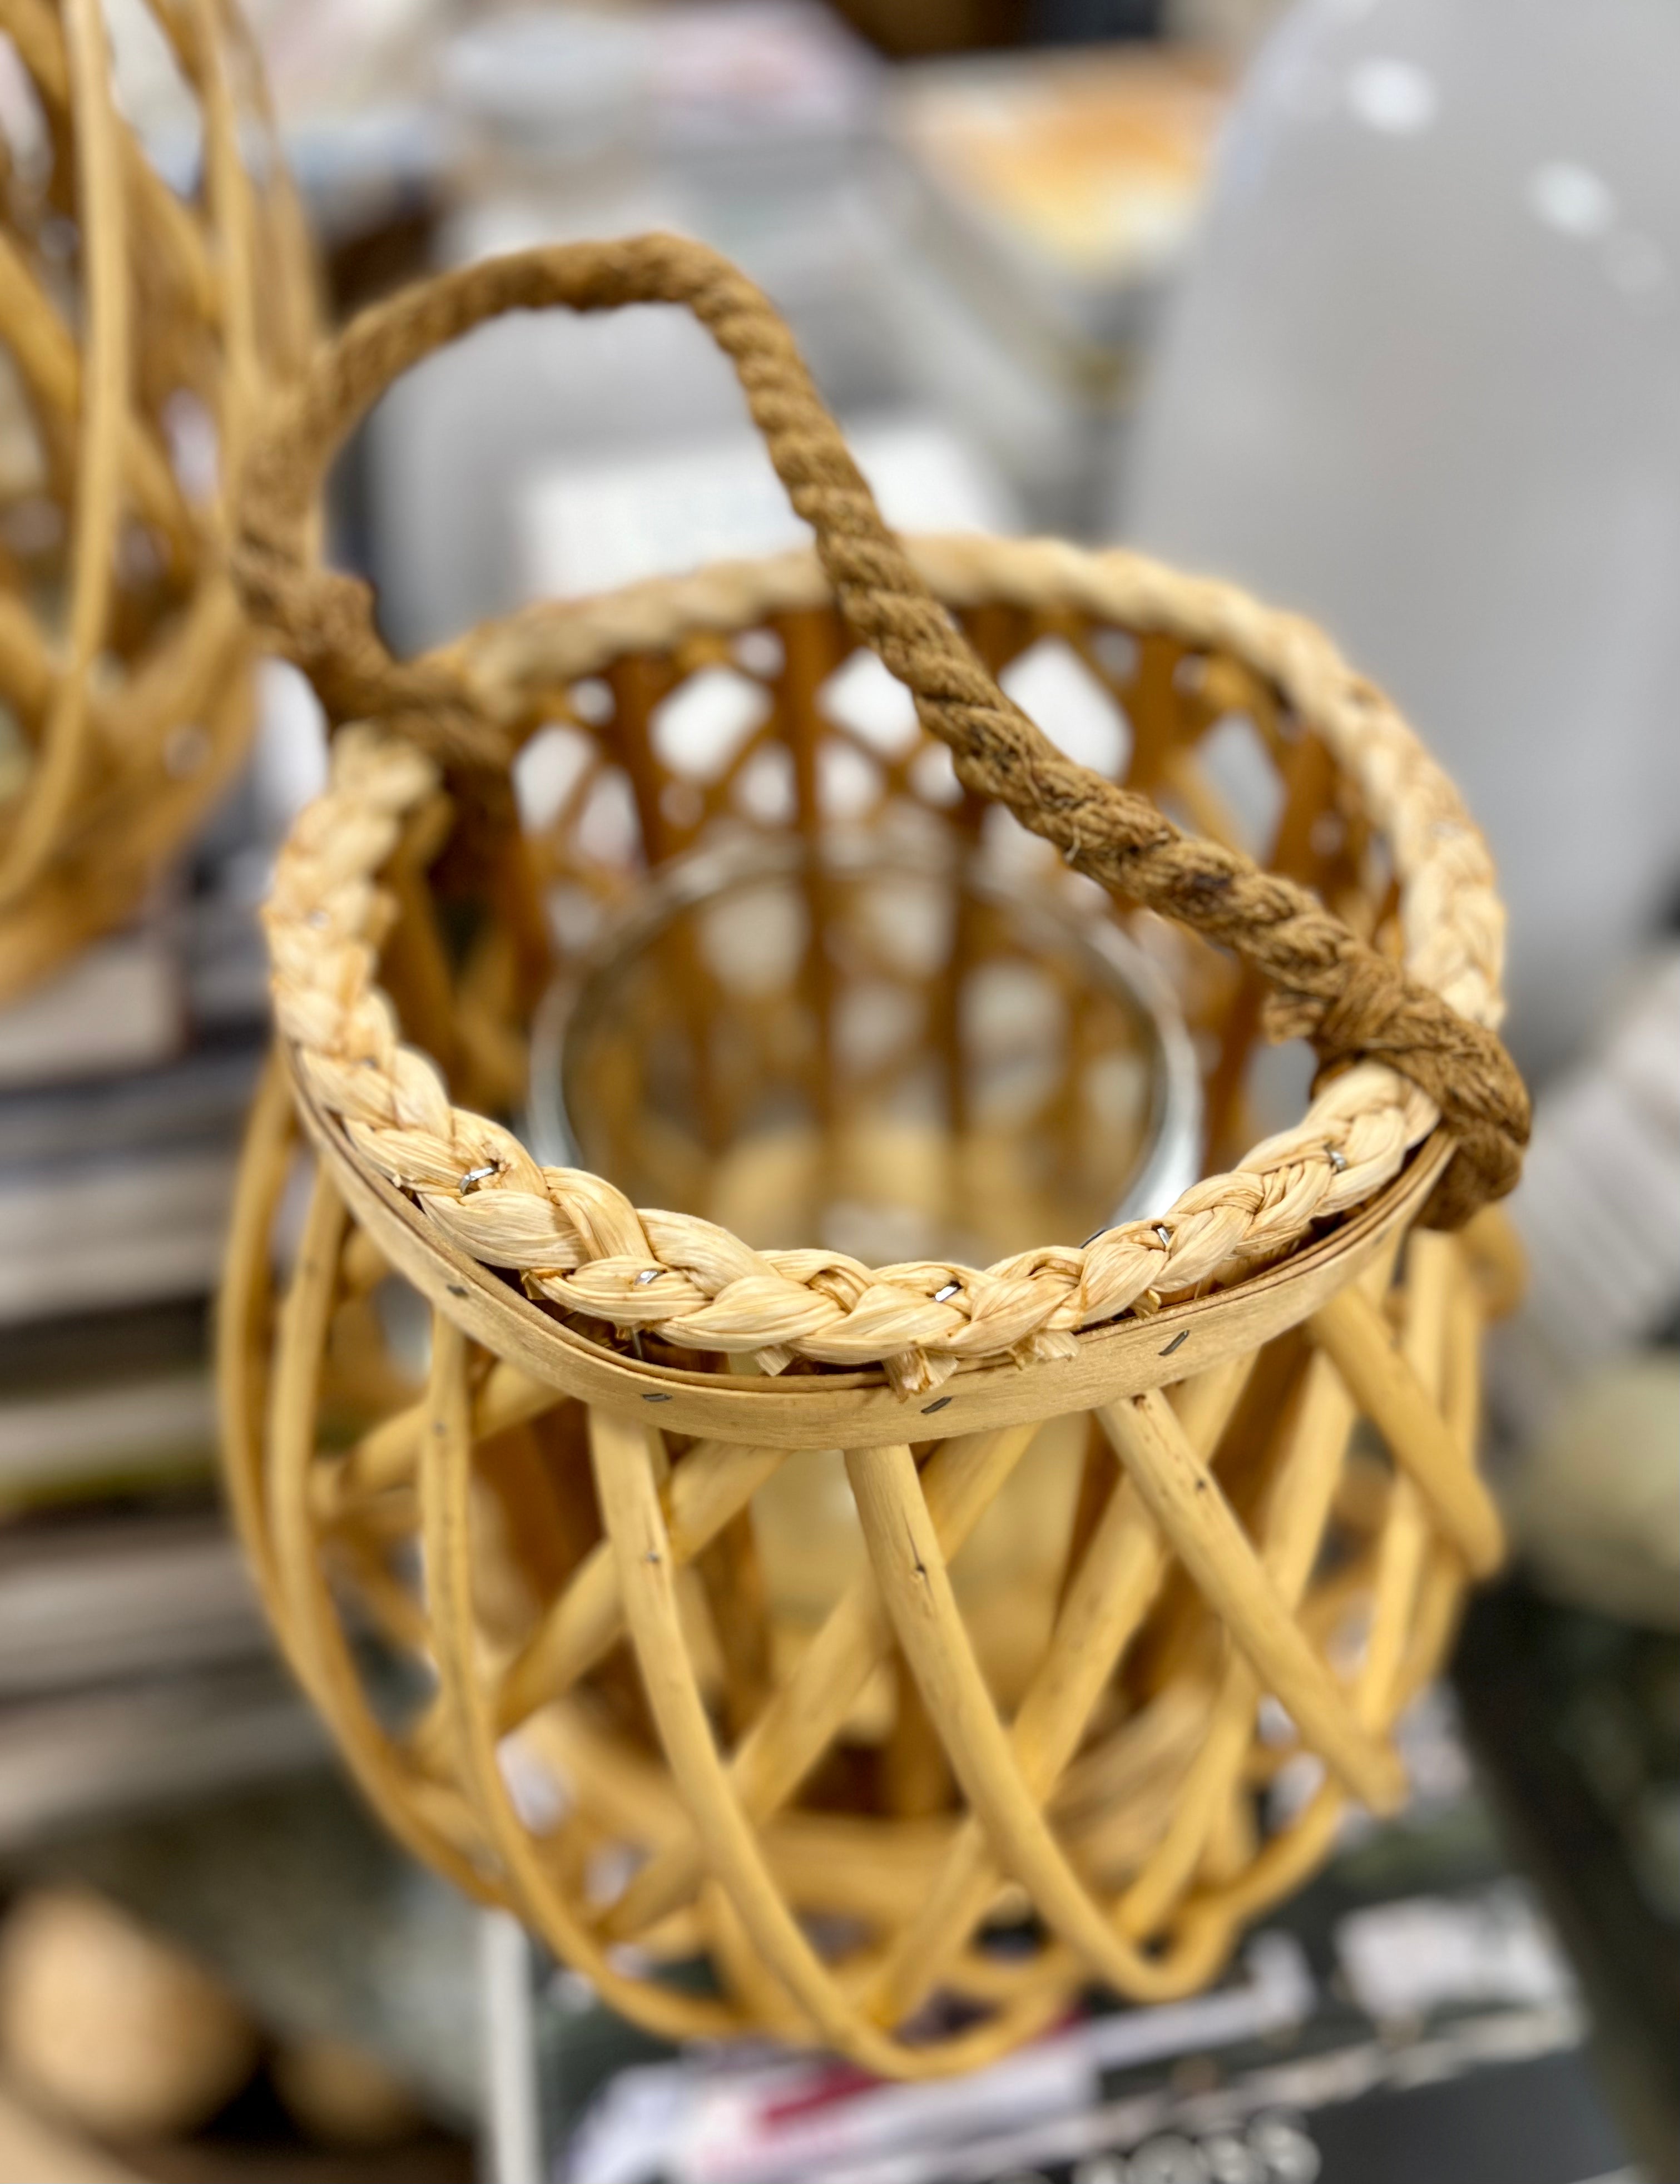 Woven Lanterns with Glass Insert - set of 2